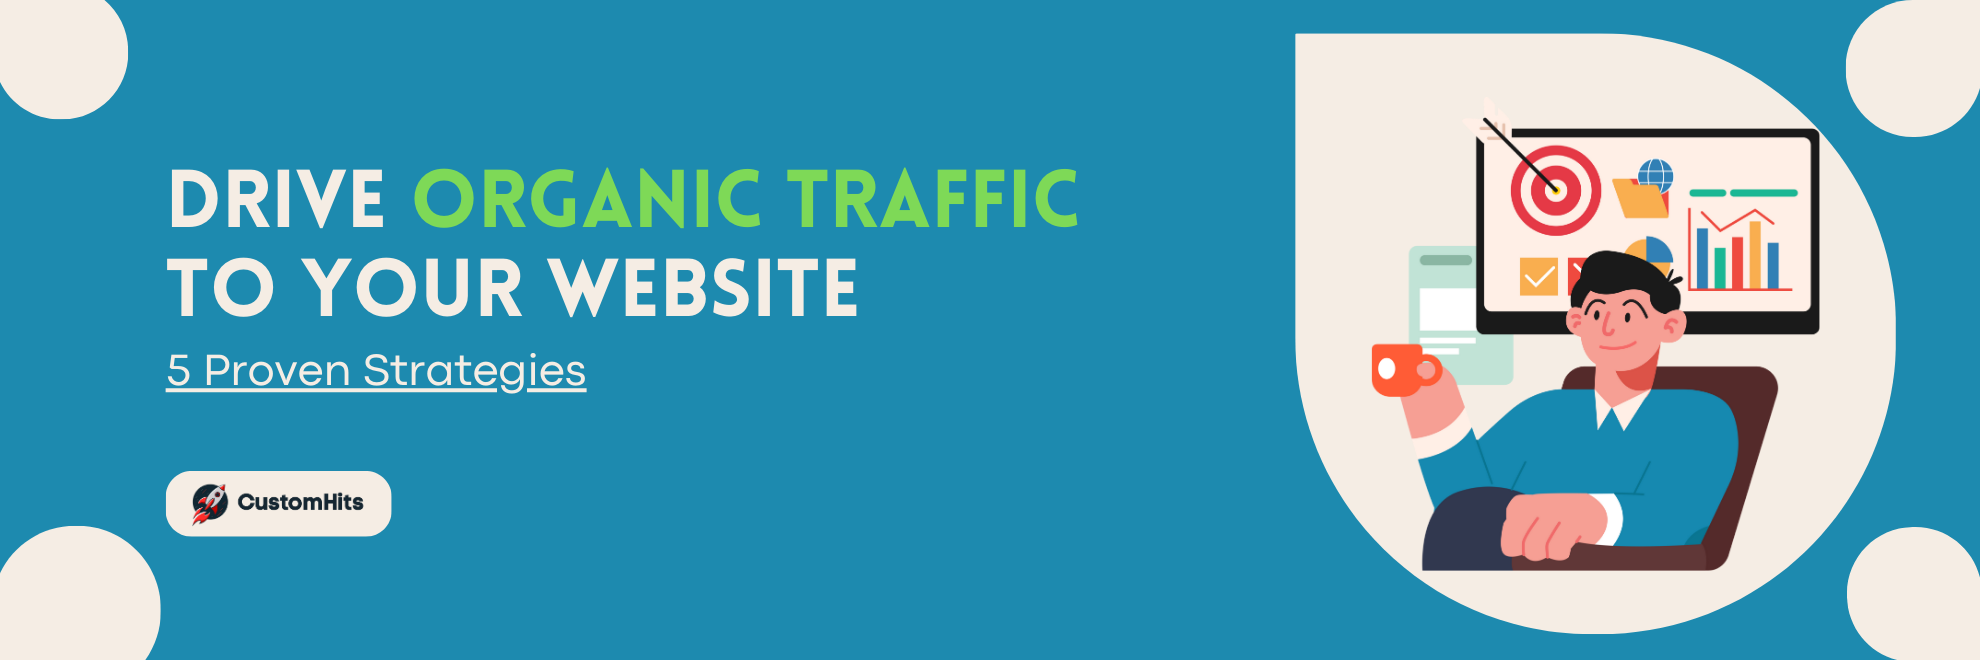 5 Proven Strategies to Drive Organic Traffic to Your Website